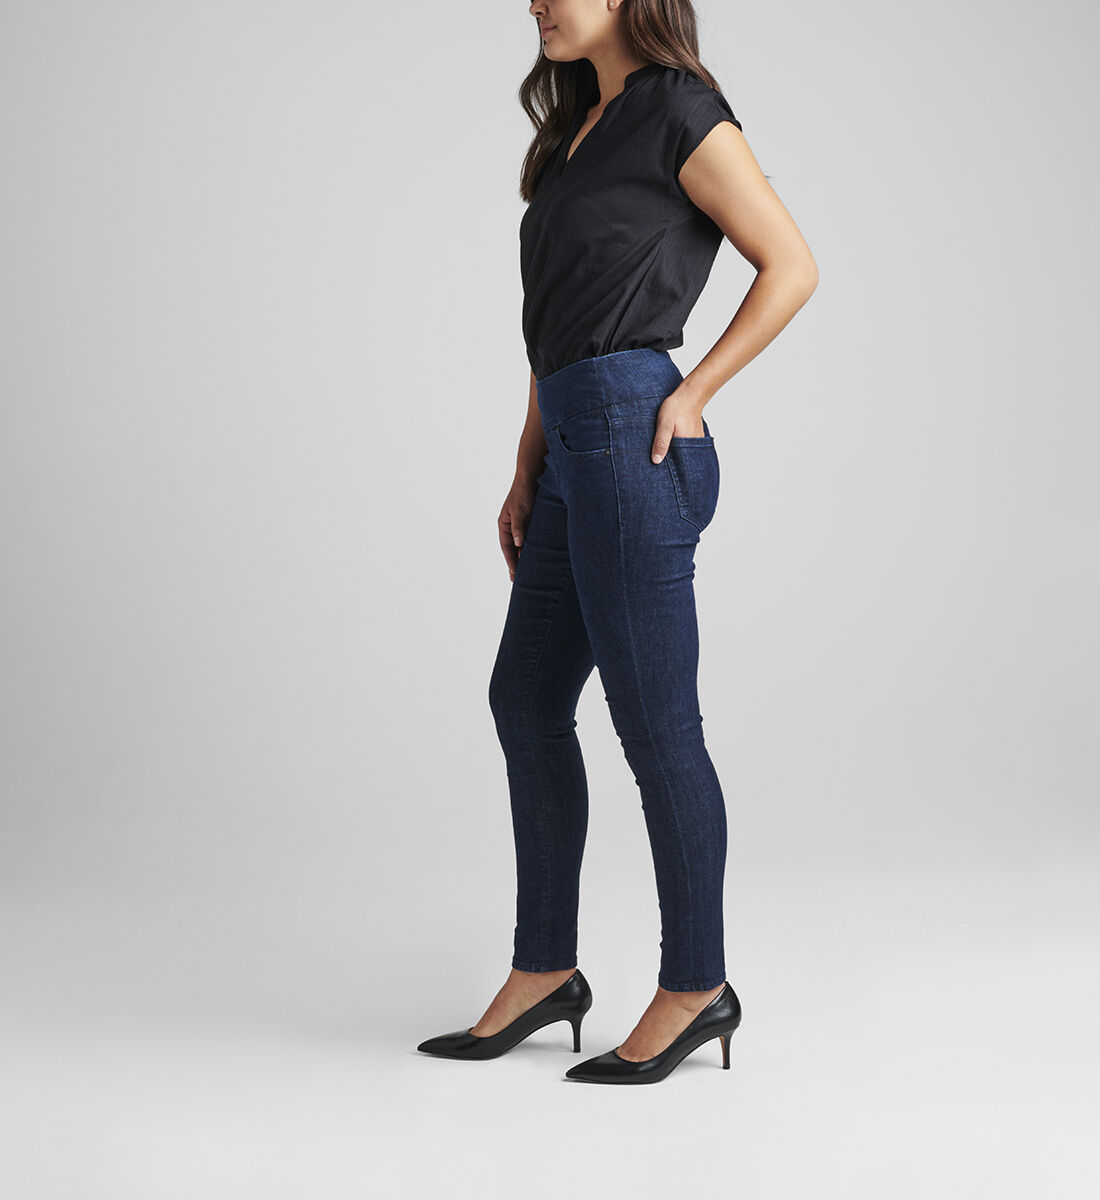 Nora Mid Rise Skinny Pull-On Jeans Side